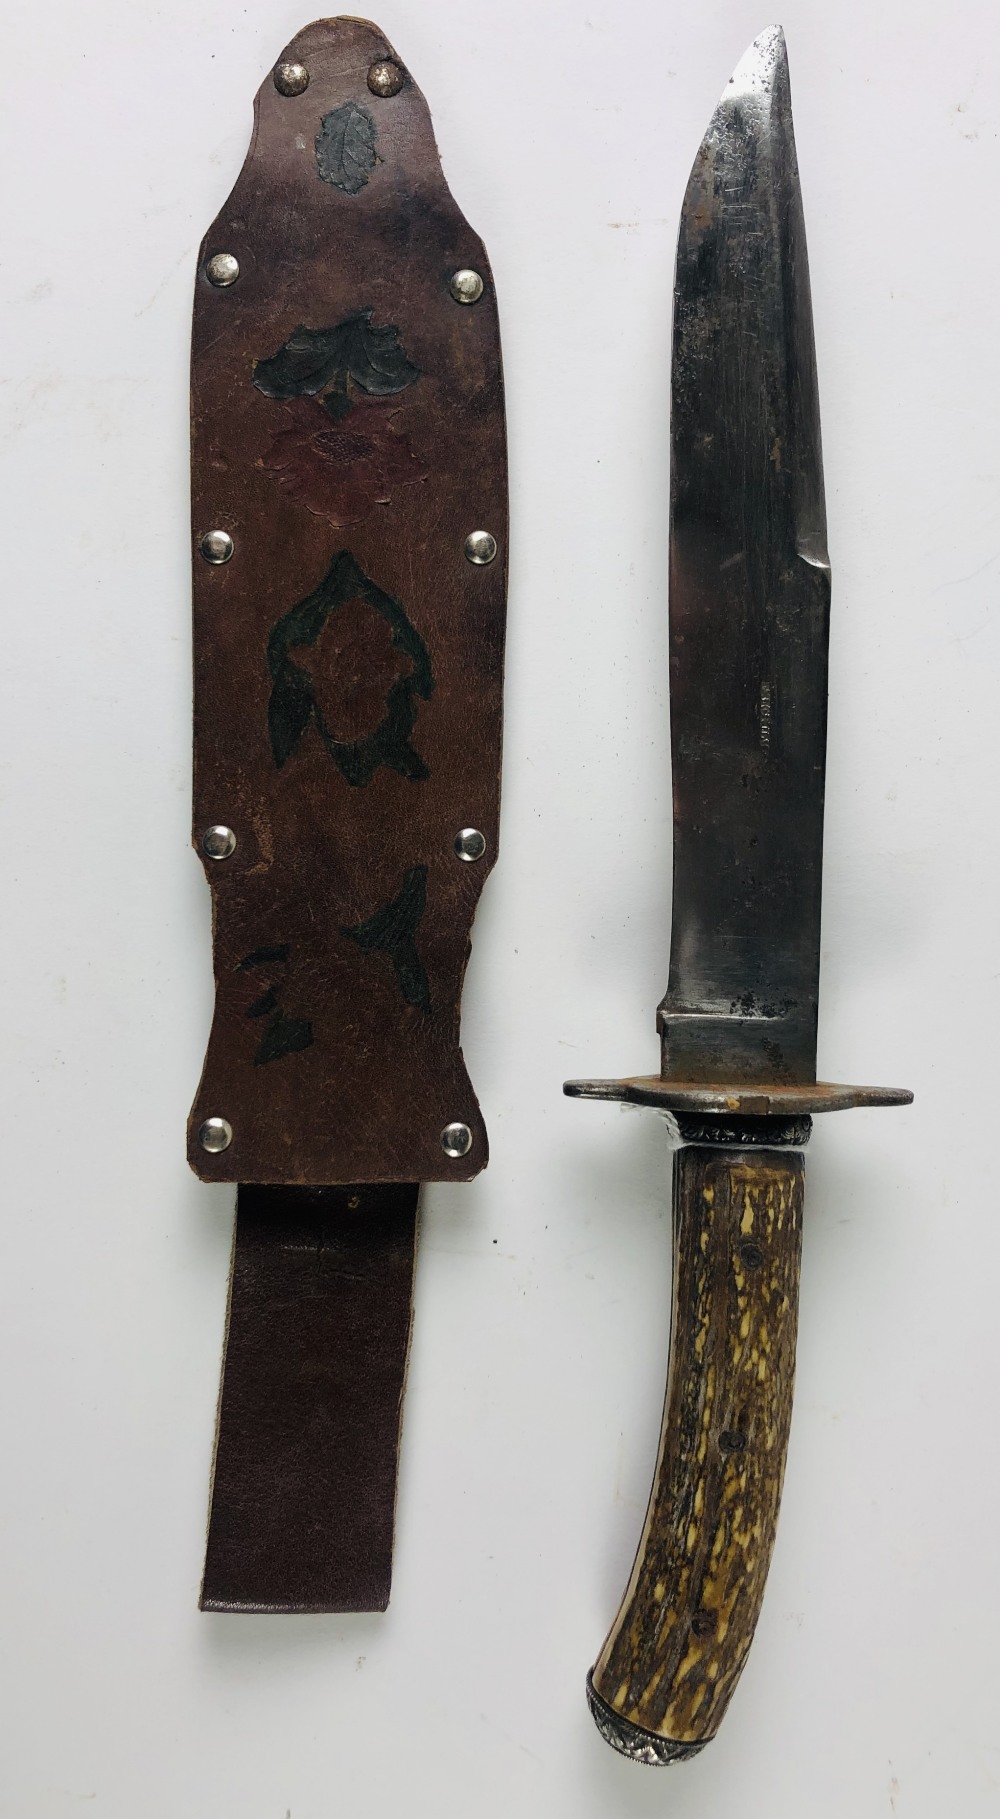 A typical early 19th Century Bowie Knife, with 8 1/2" German steel blade, stamped F.